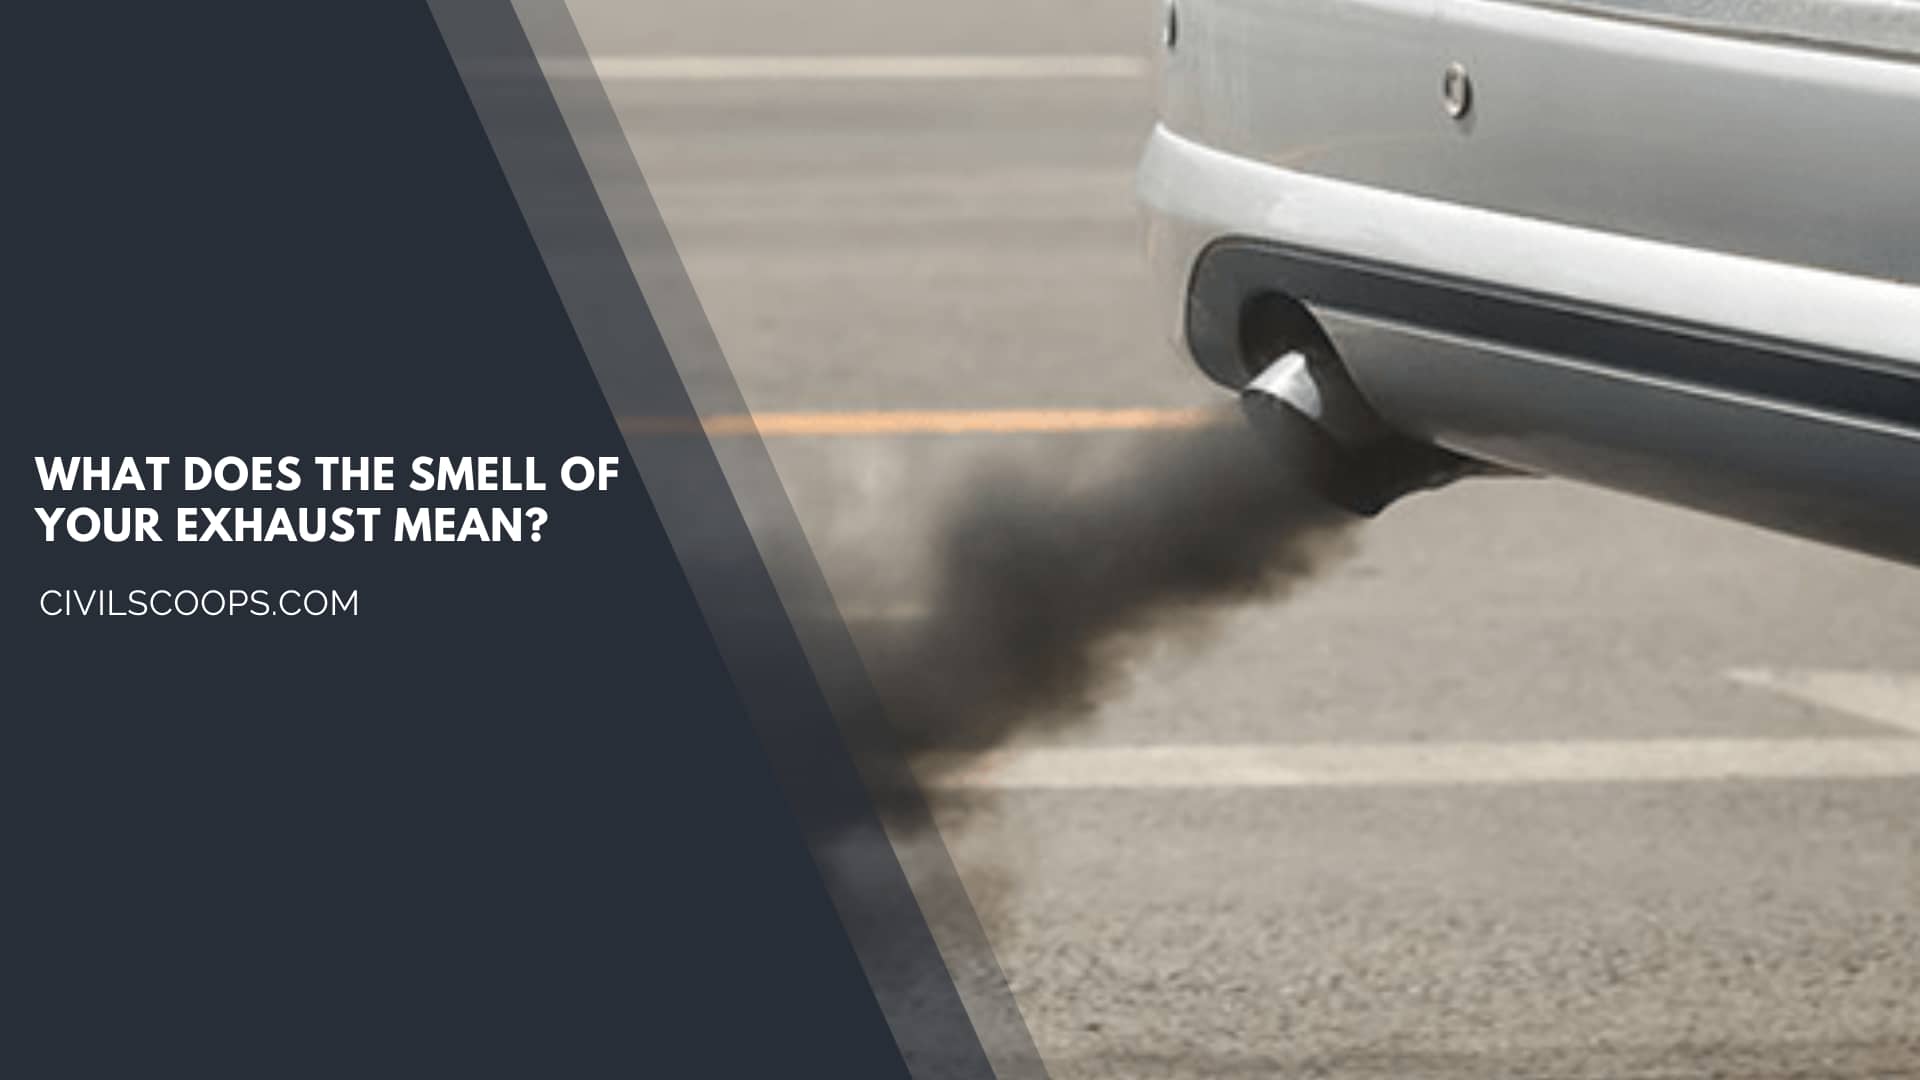 What Does the Smell of Your Exhaust Mean?